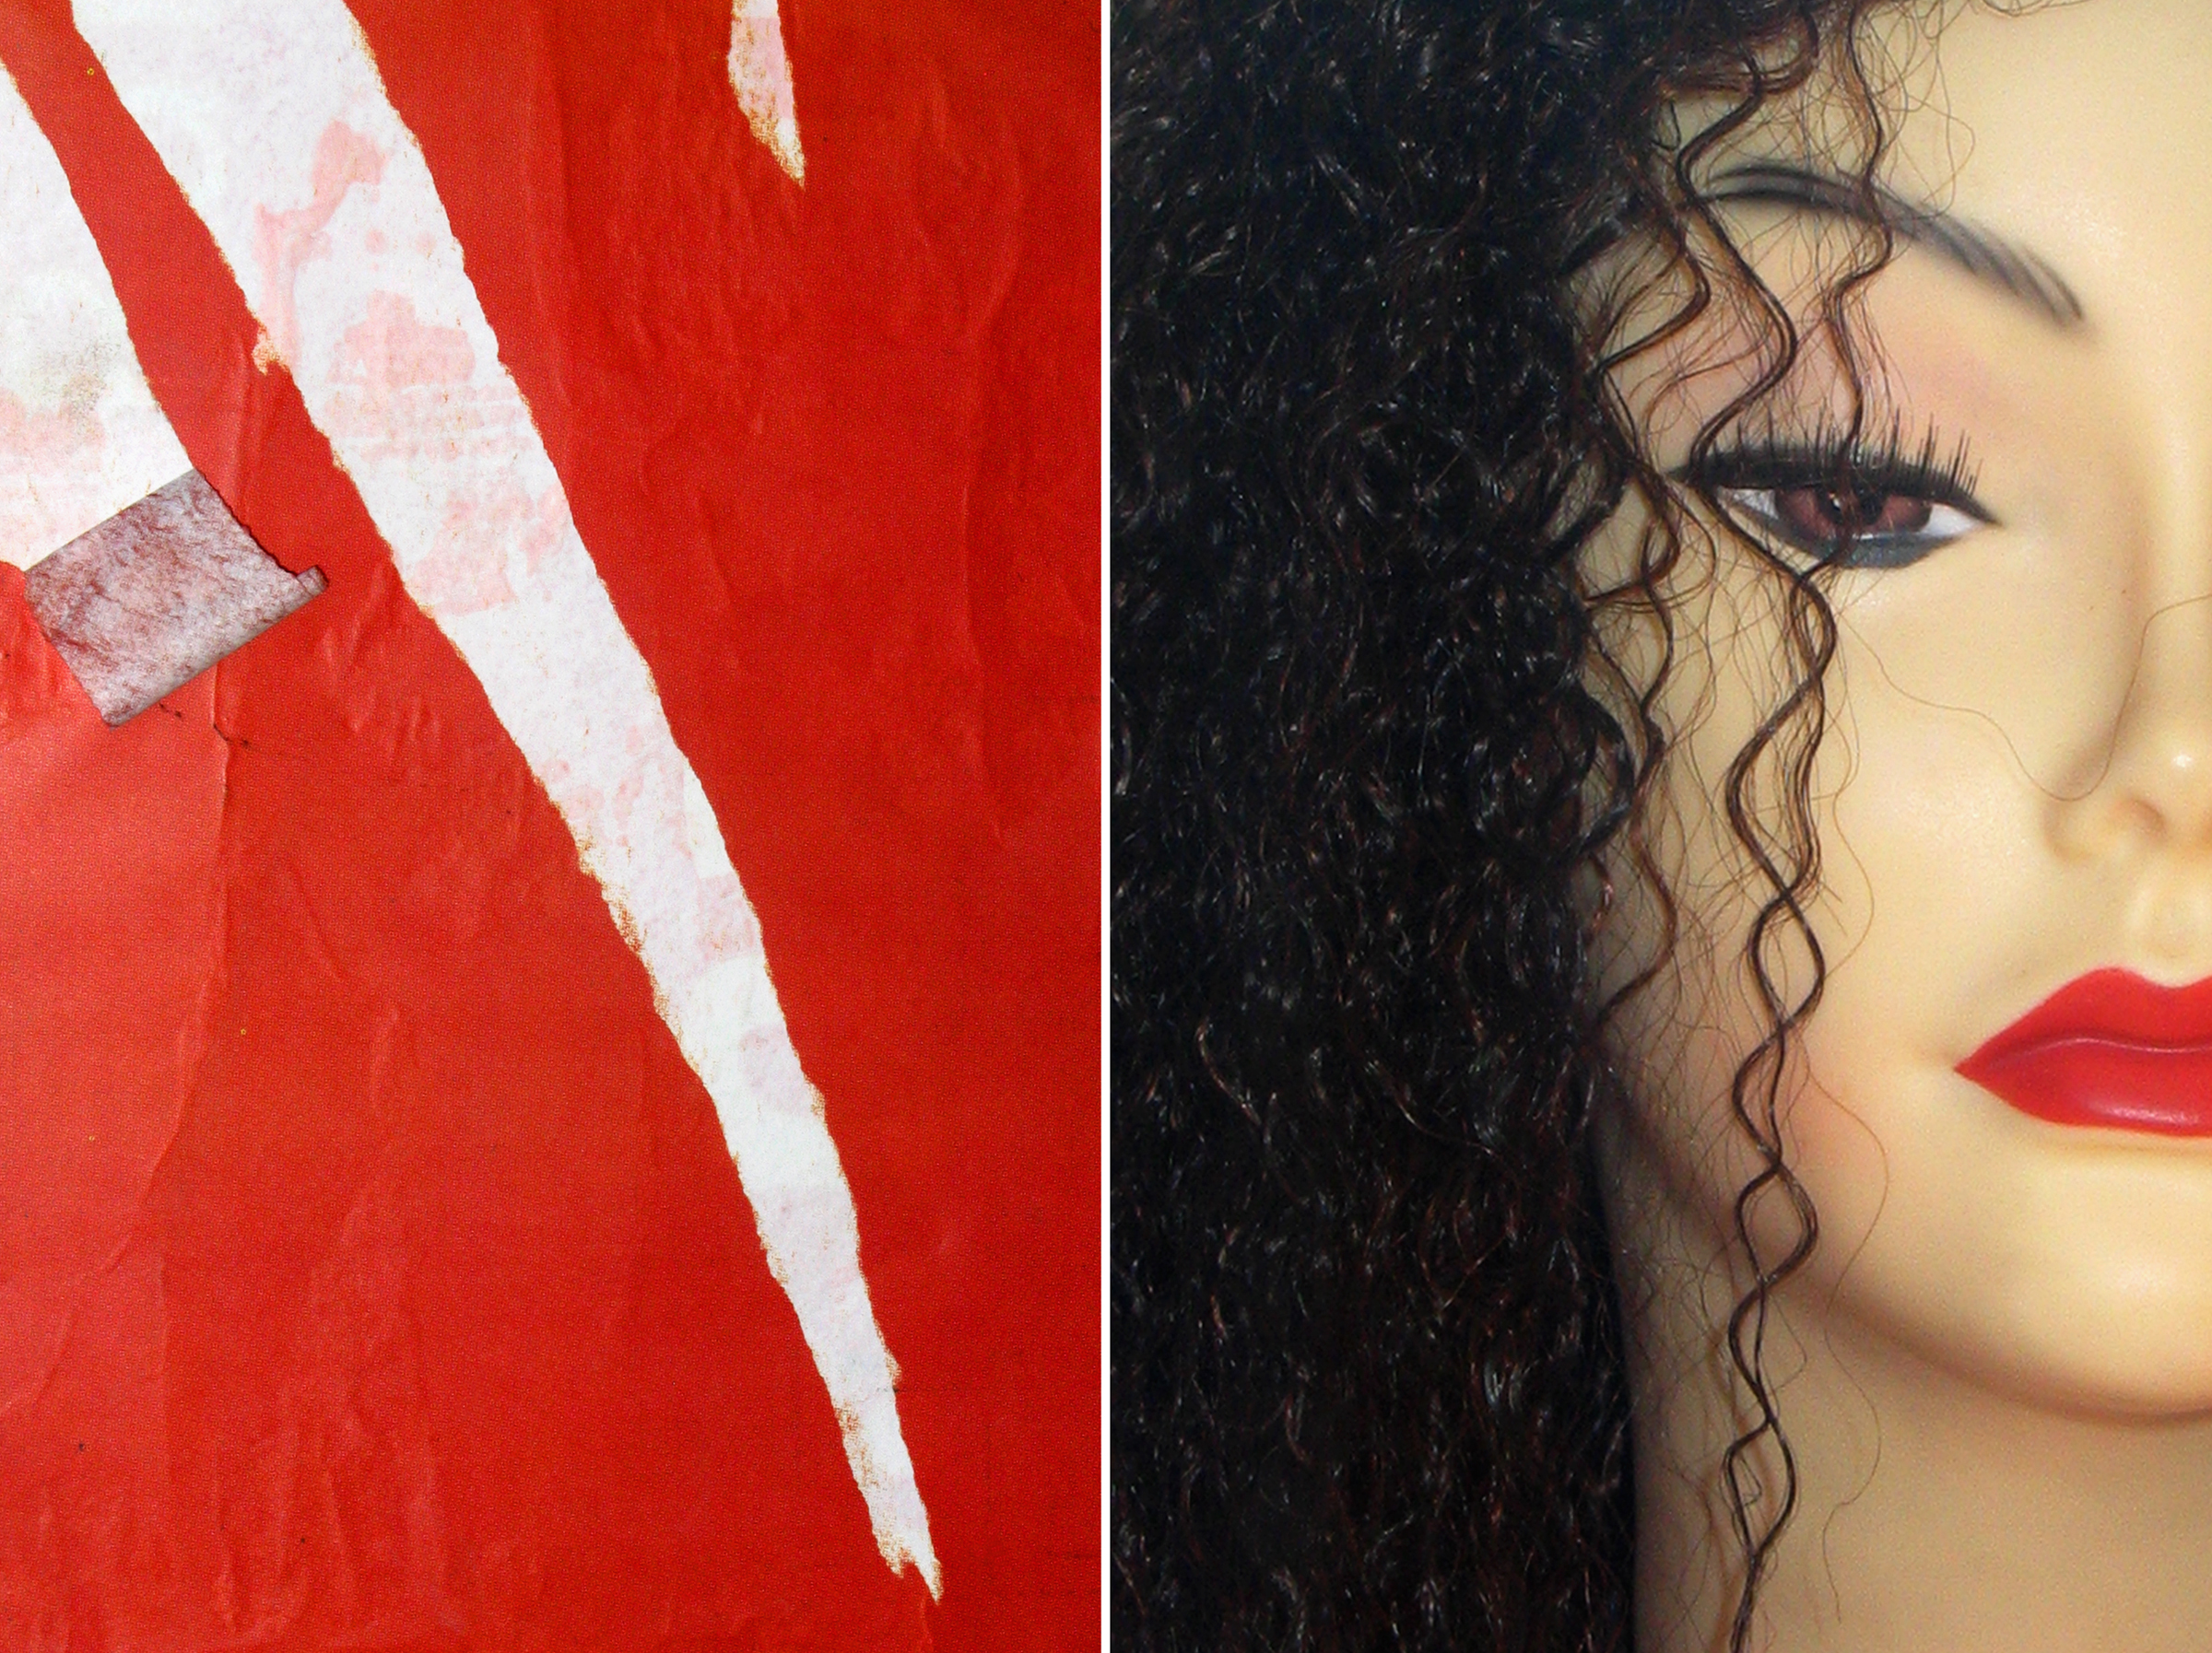 Recoleta Diptych 2 kinky hair and poster.jpg